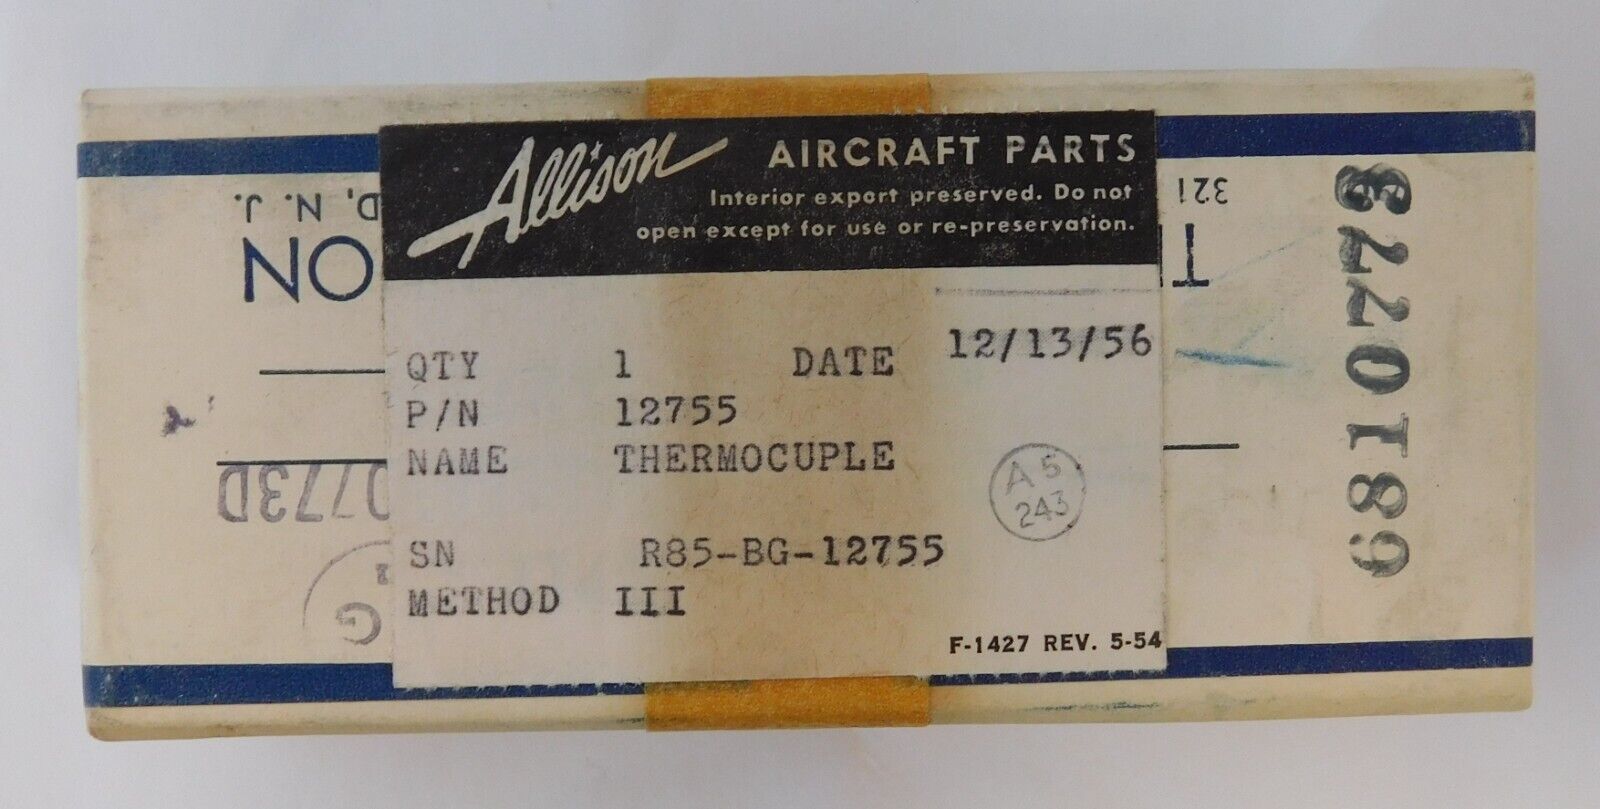 Allison Aircraft Thermocouple - SEALED 1956 - Part #12755